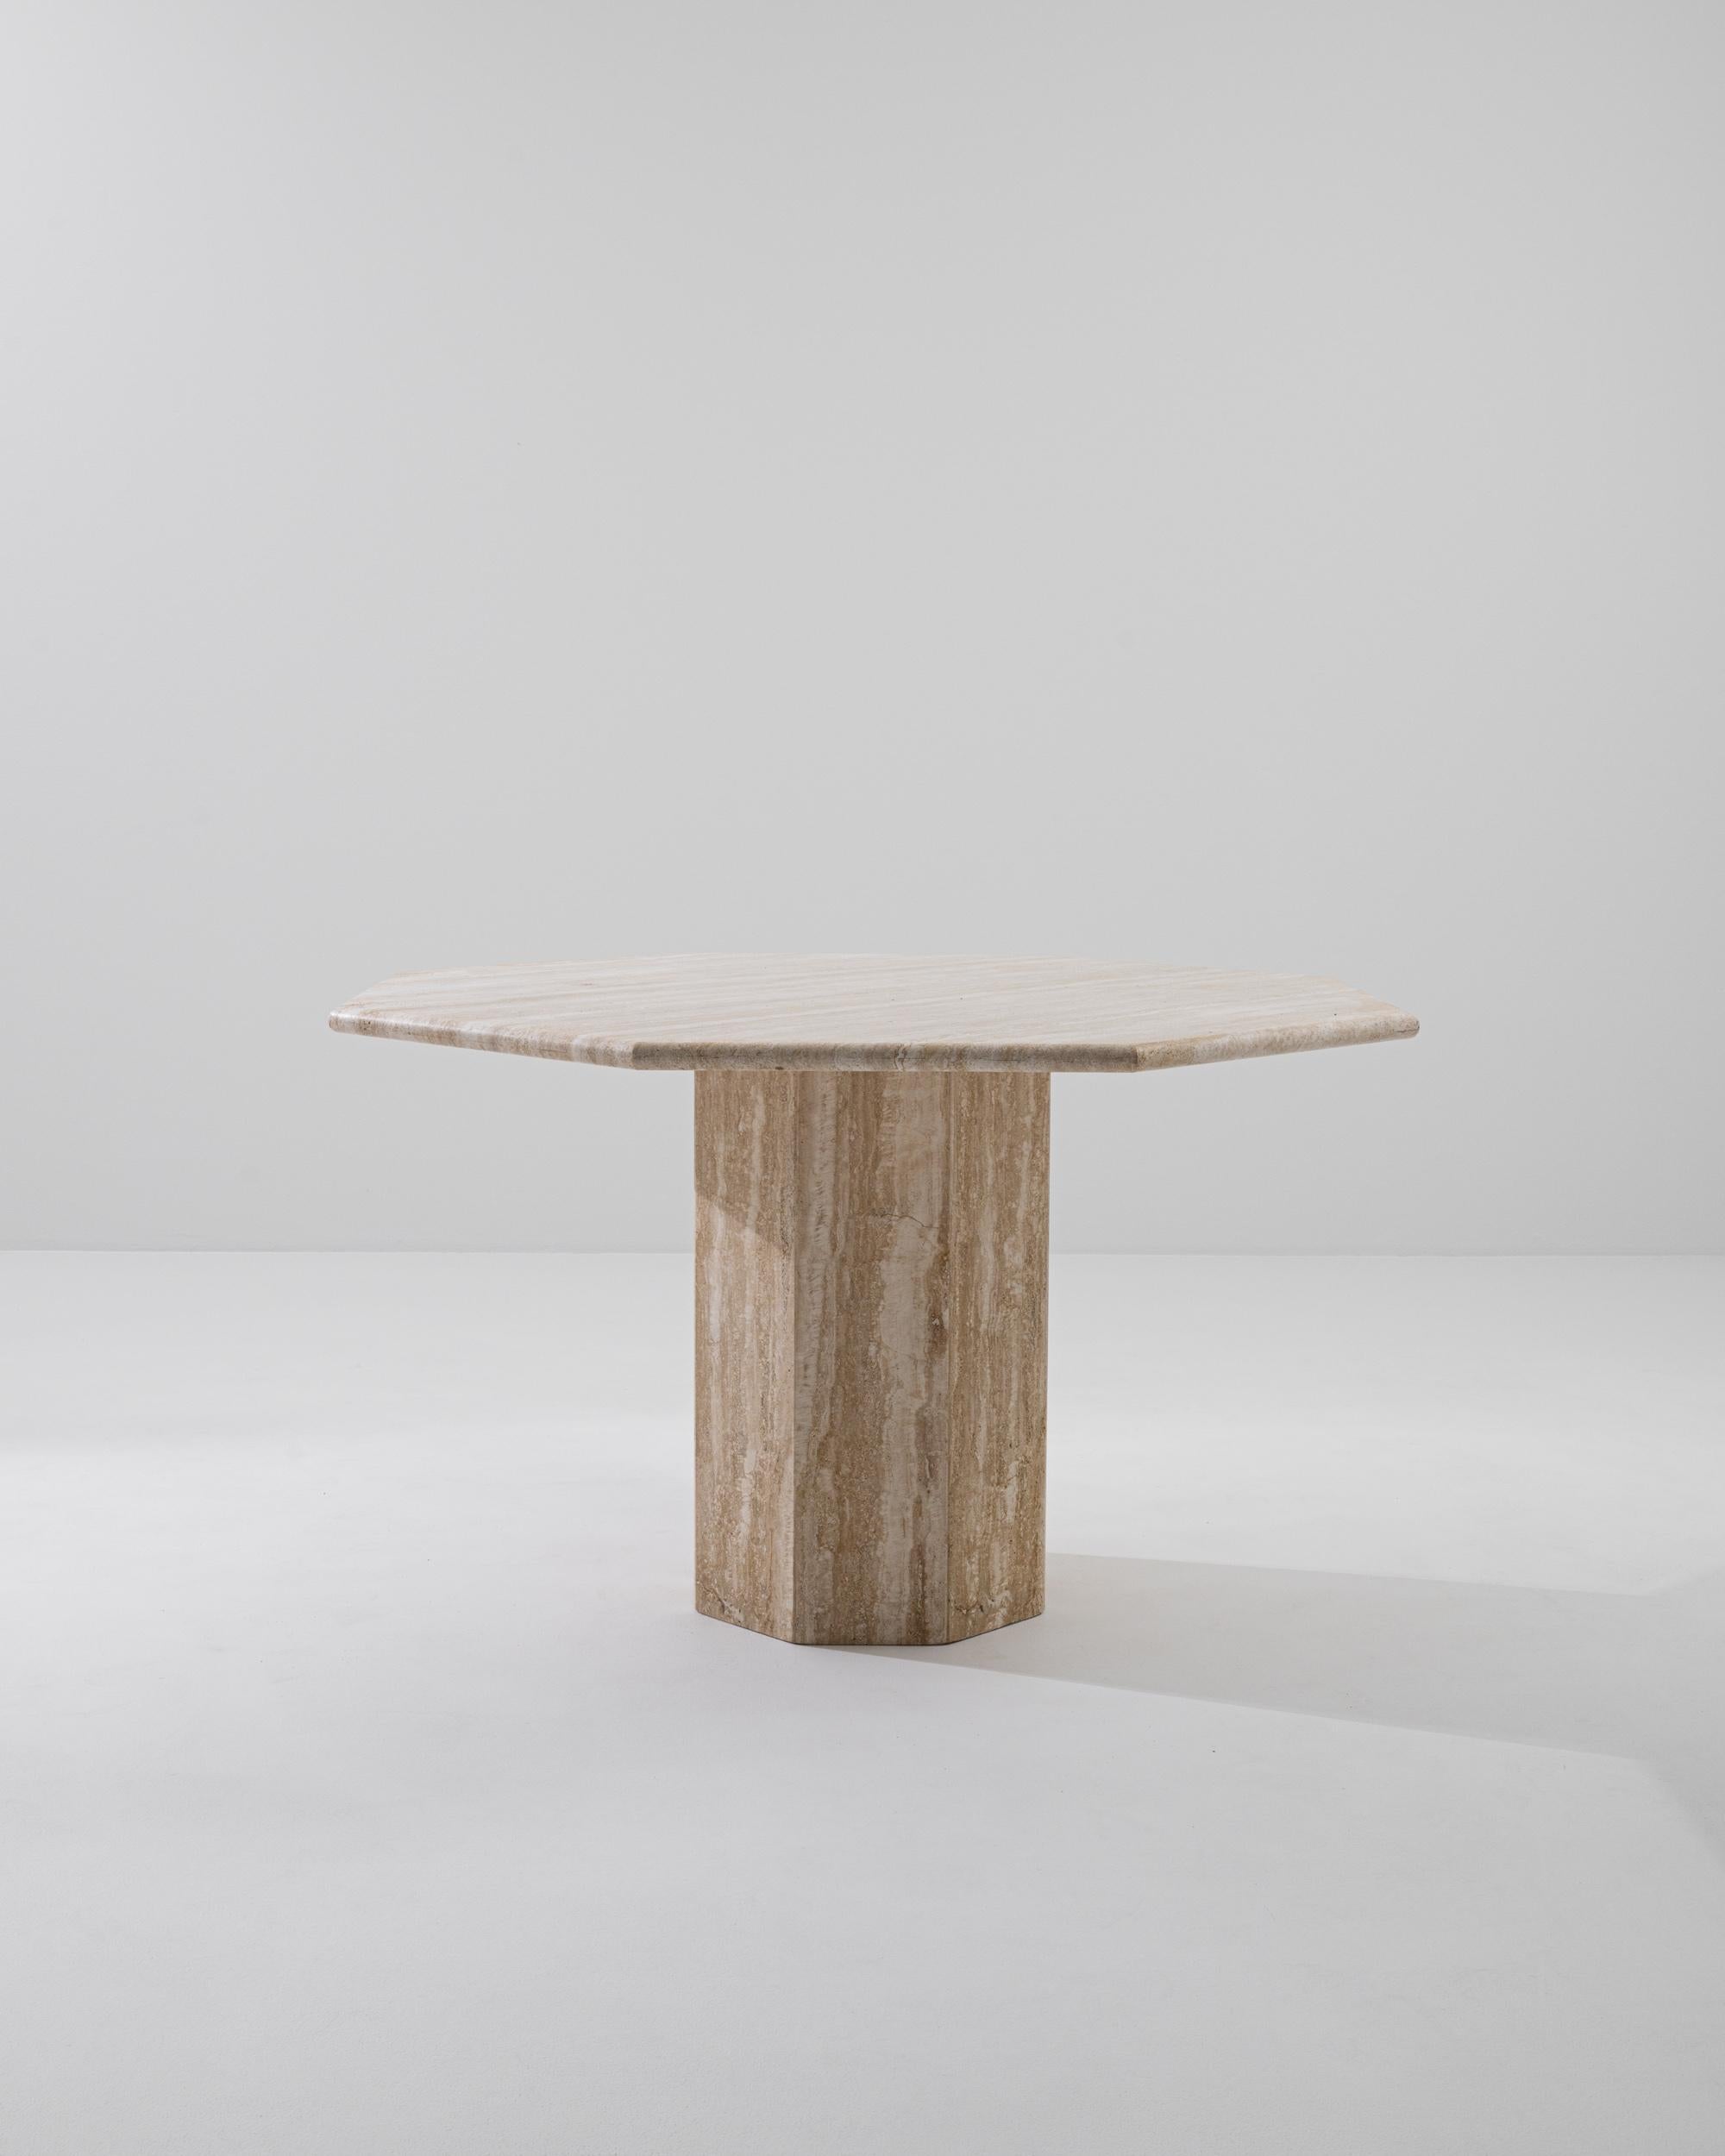 Geometric and bold, this Mid-Century Modern travertine table offers a show-stopping centerpiece. Built in Italy in the 1970s, an octagonal tabletop sits atop an eight-sided pillar, forming an angular yet harmonious silhouette. The austere beauty of